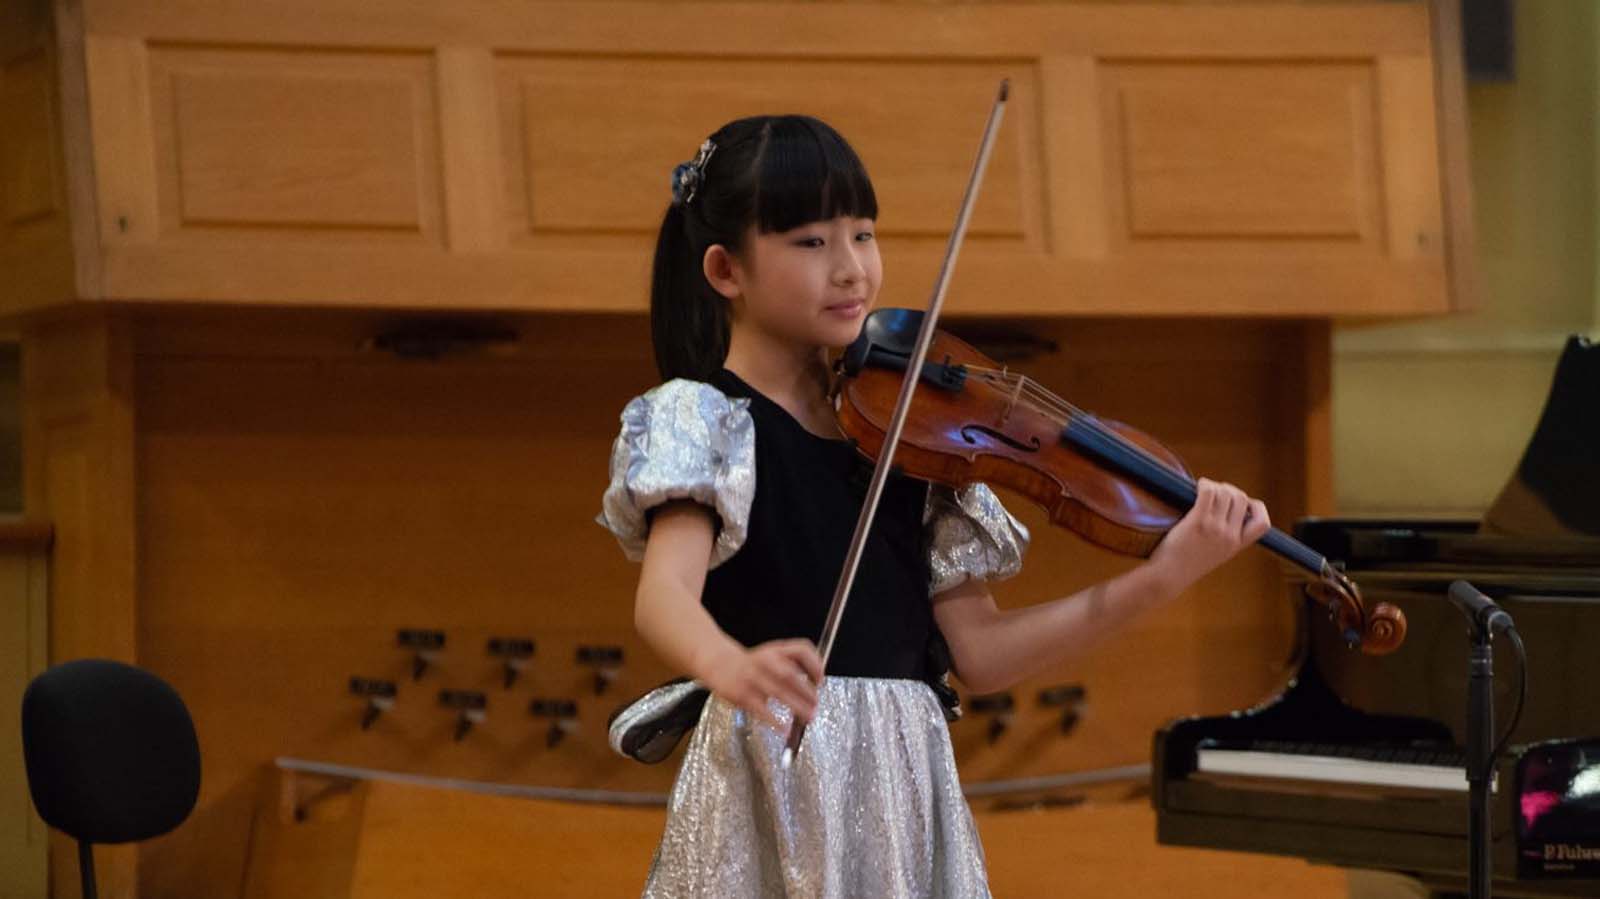 Can Singapore nurture the talents of a musical prodigy?